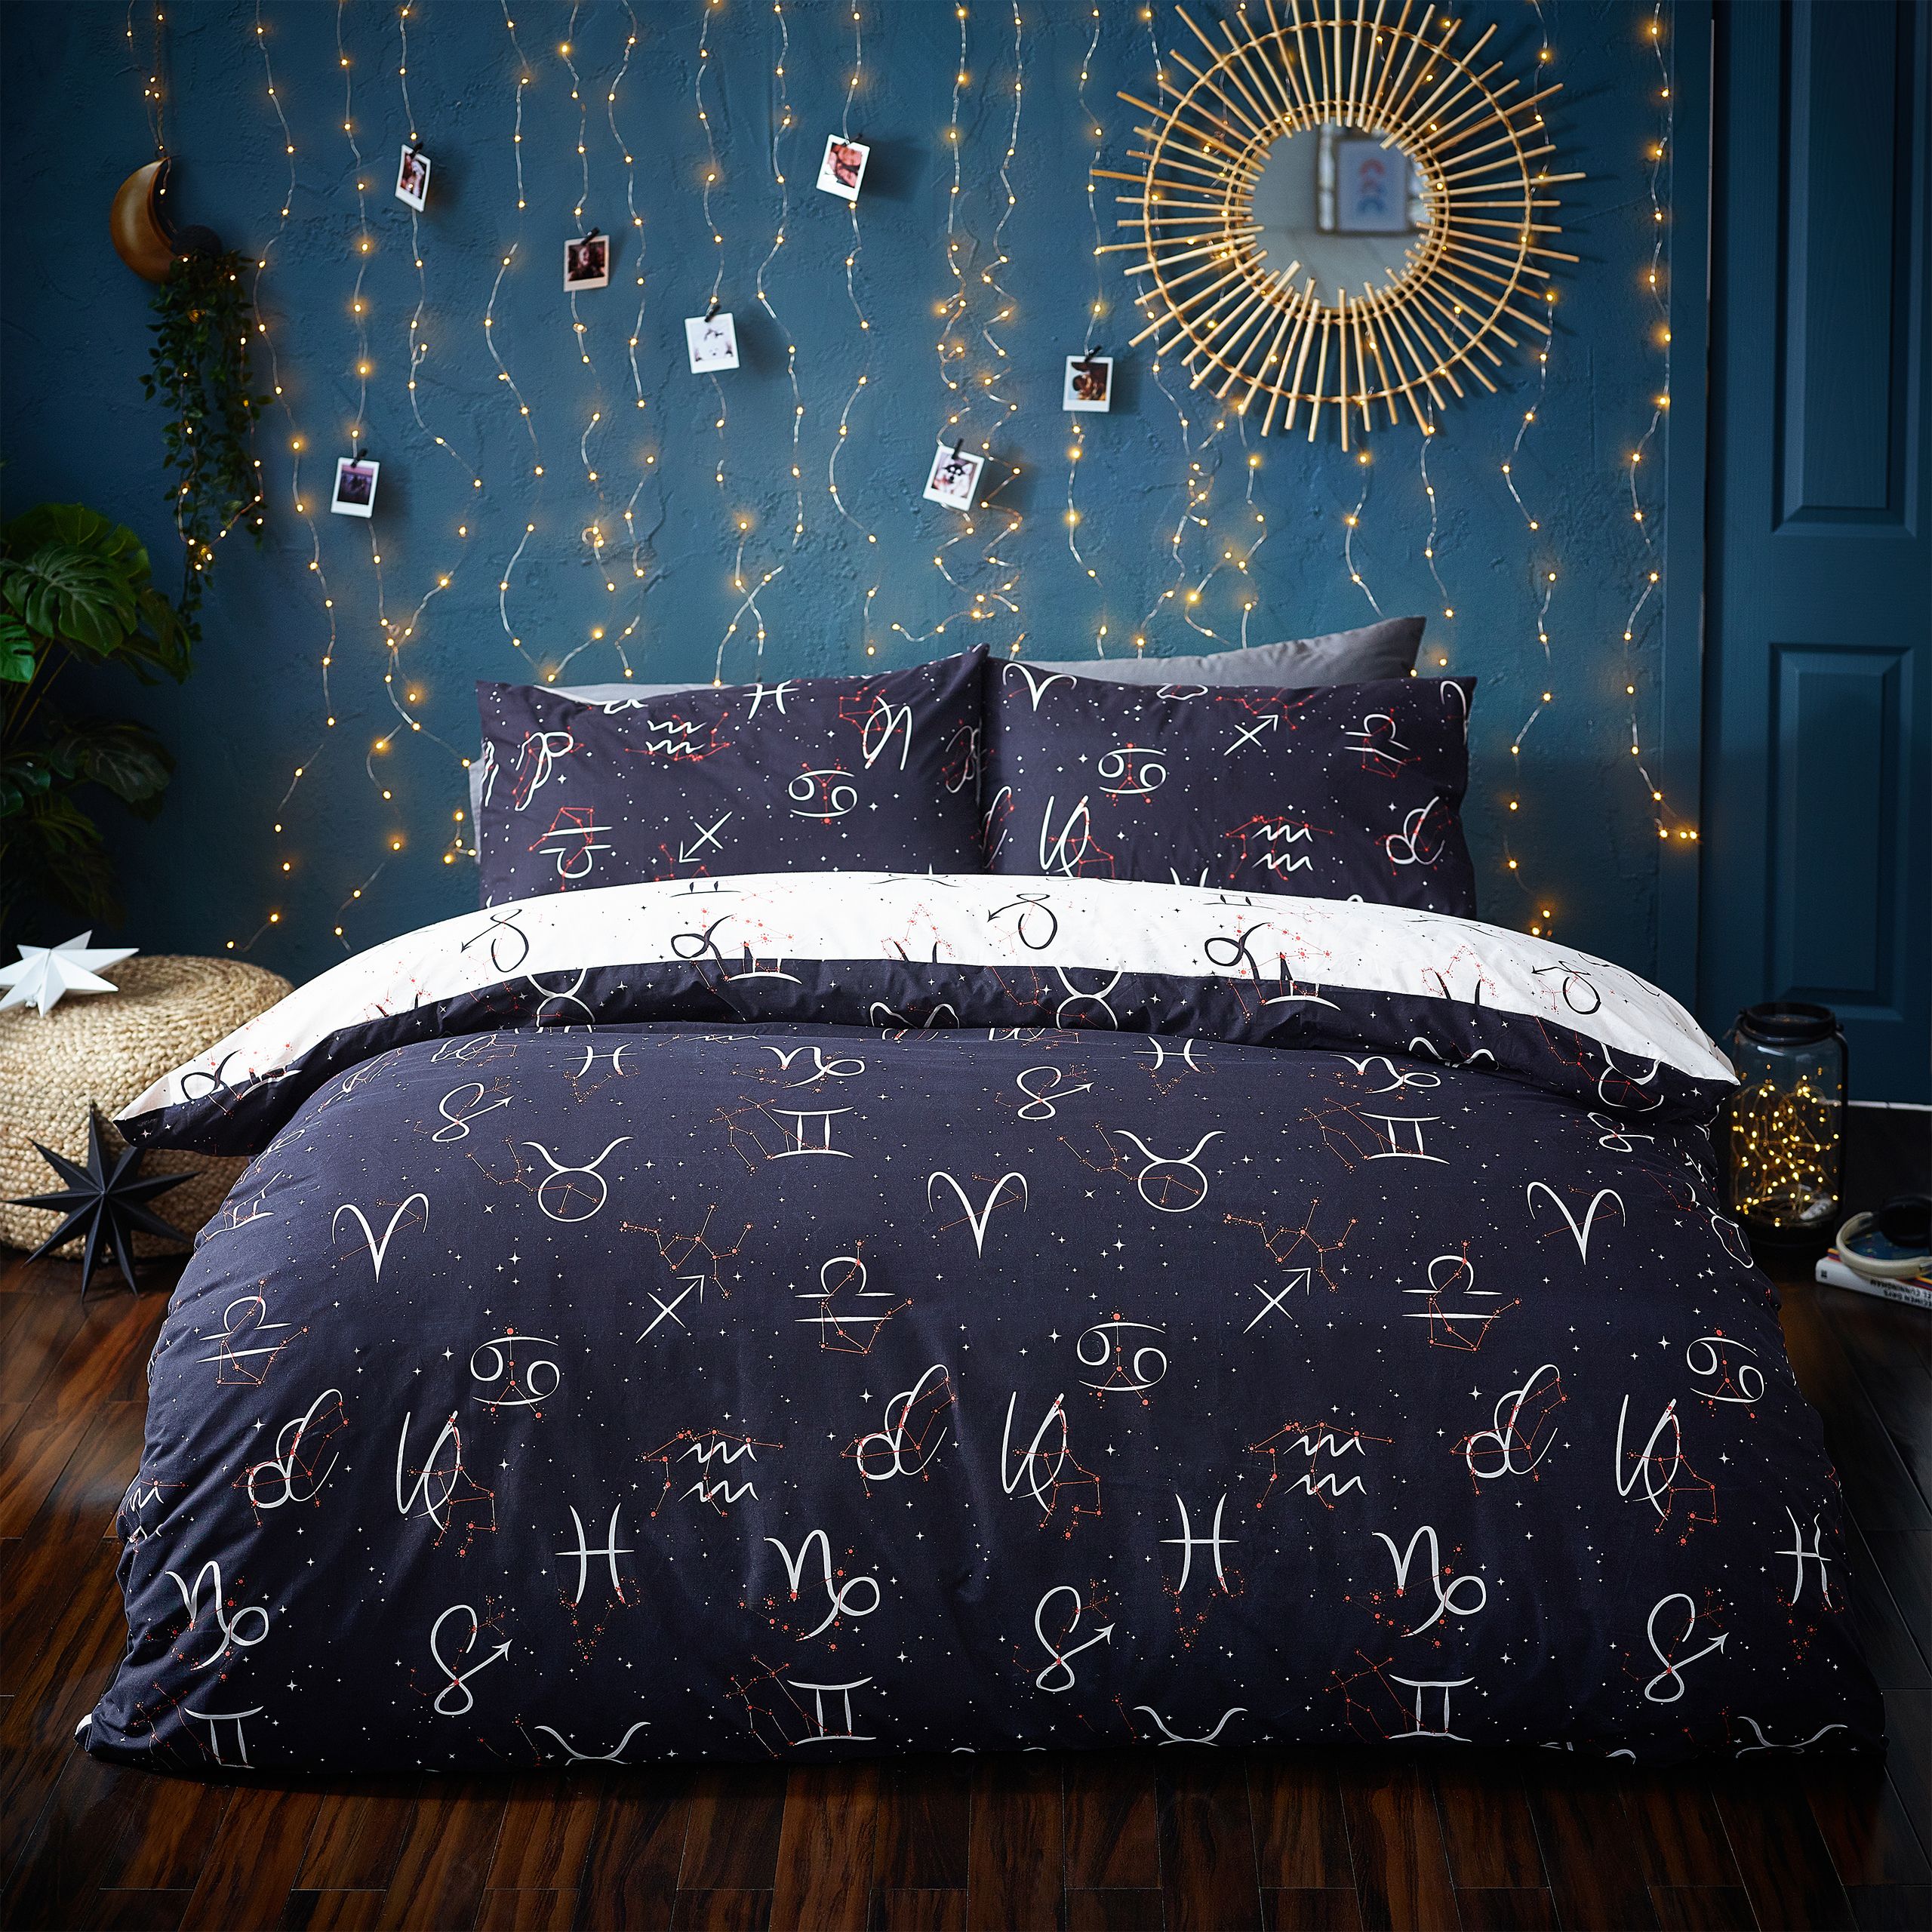 What is your zodiac sign? This zodiac inspired duvet set featuring all the zodiac signs surrounded by star constellations. The design continues to the reverse on a neutral base so you can switch the look when you need to. Have the best night’s sleep with this celestial-themed duvet set.